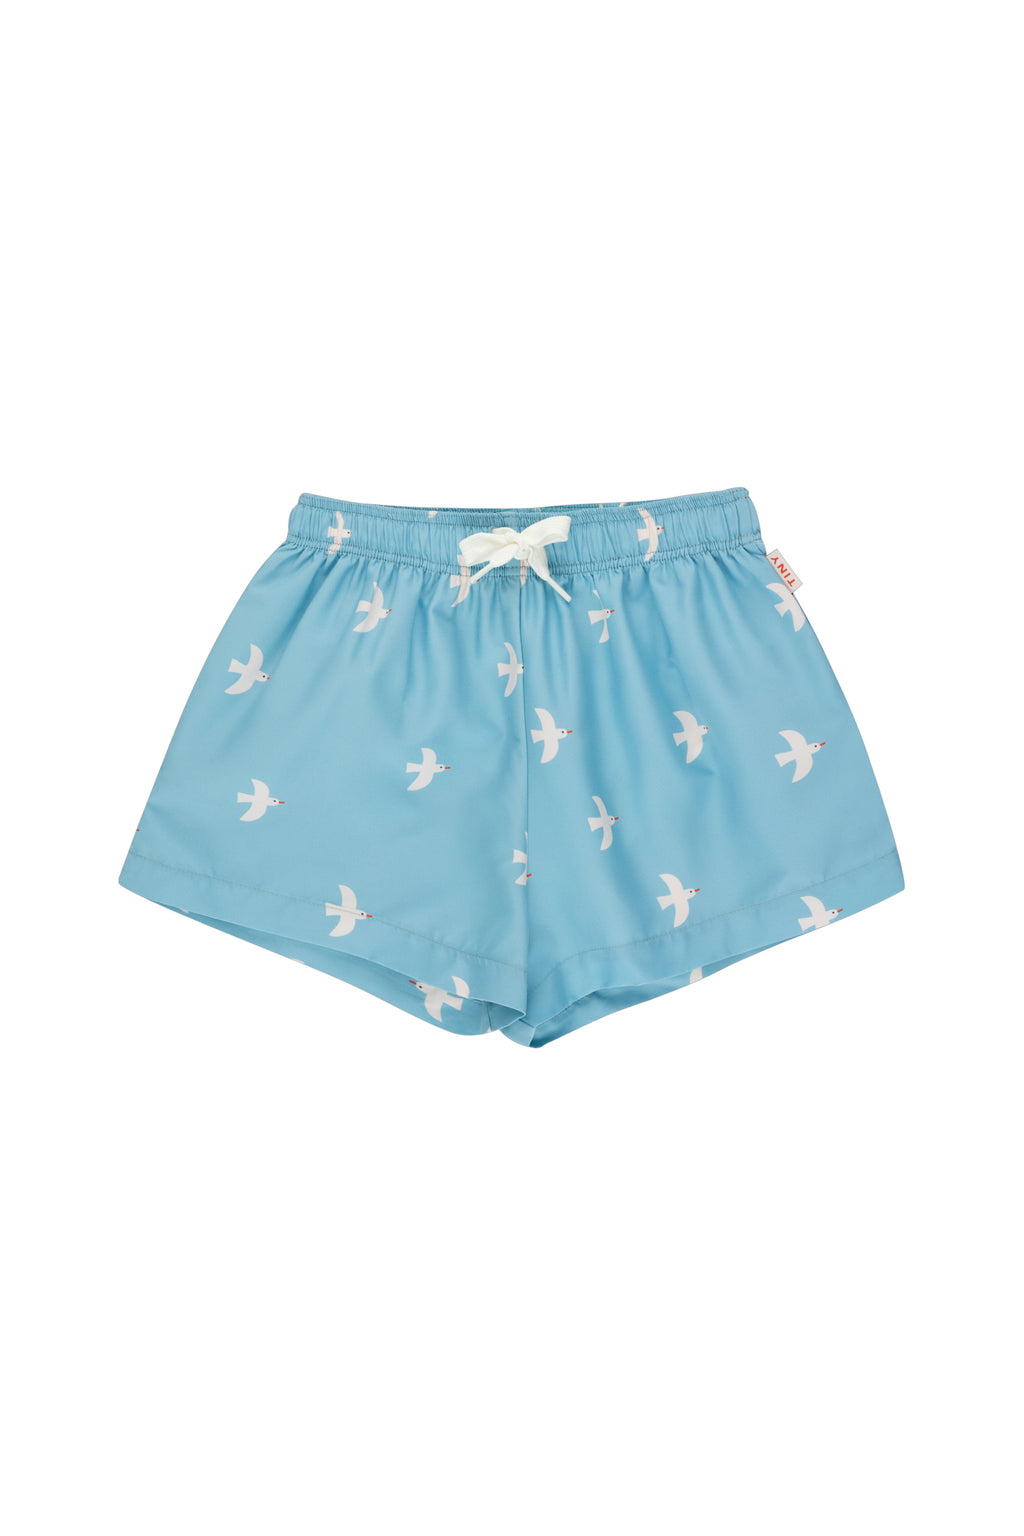 Tiny Cottons Birds Trunk - Washed Blue / Light Cream